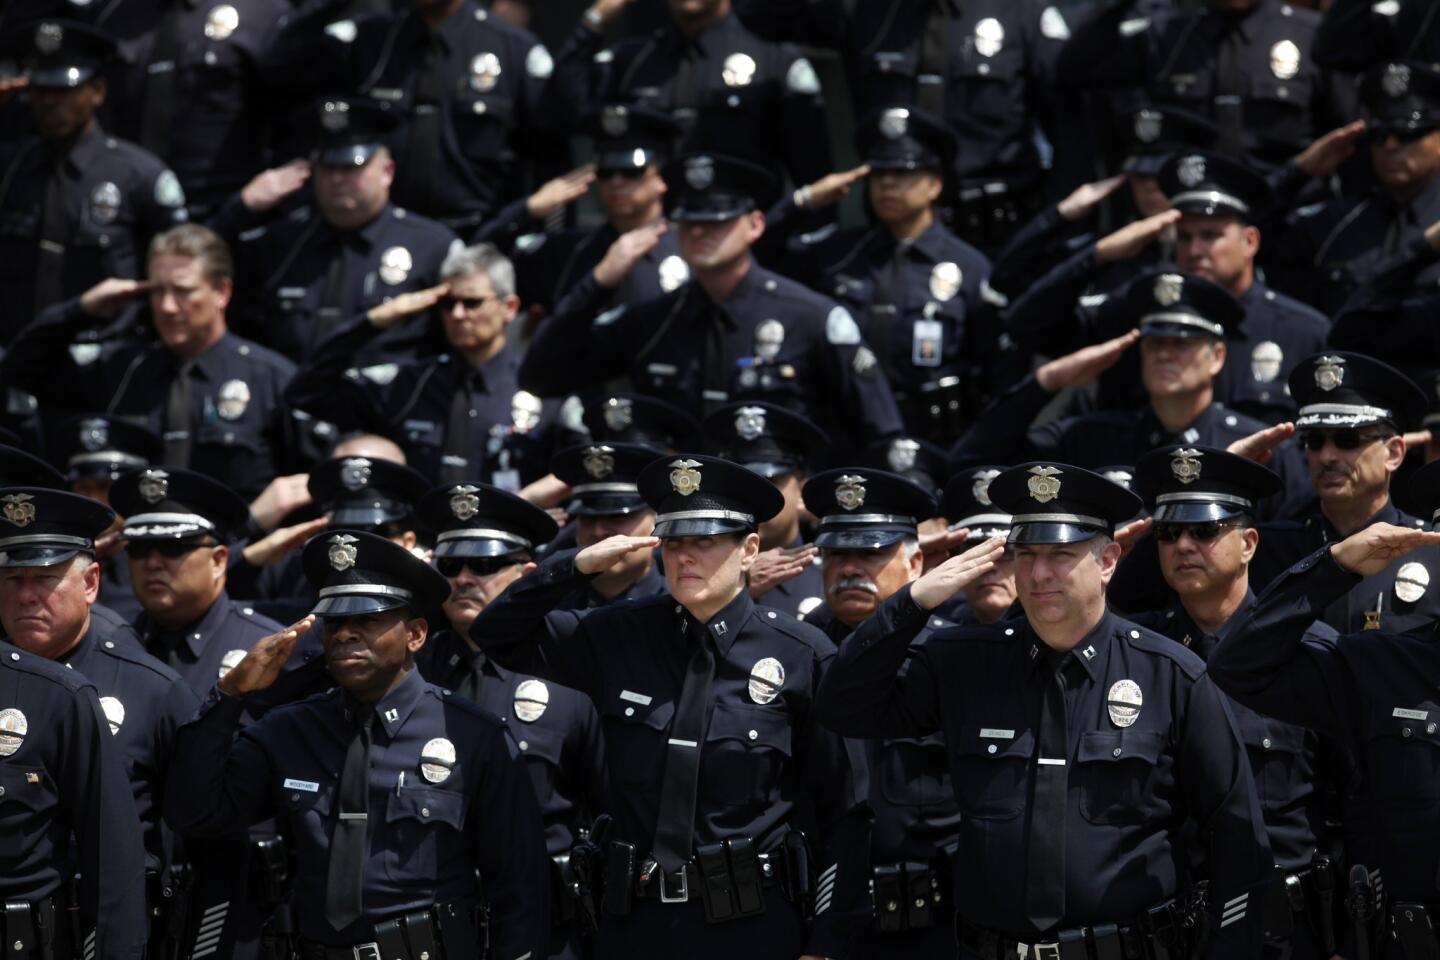 LAPD officers salute